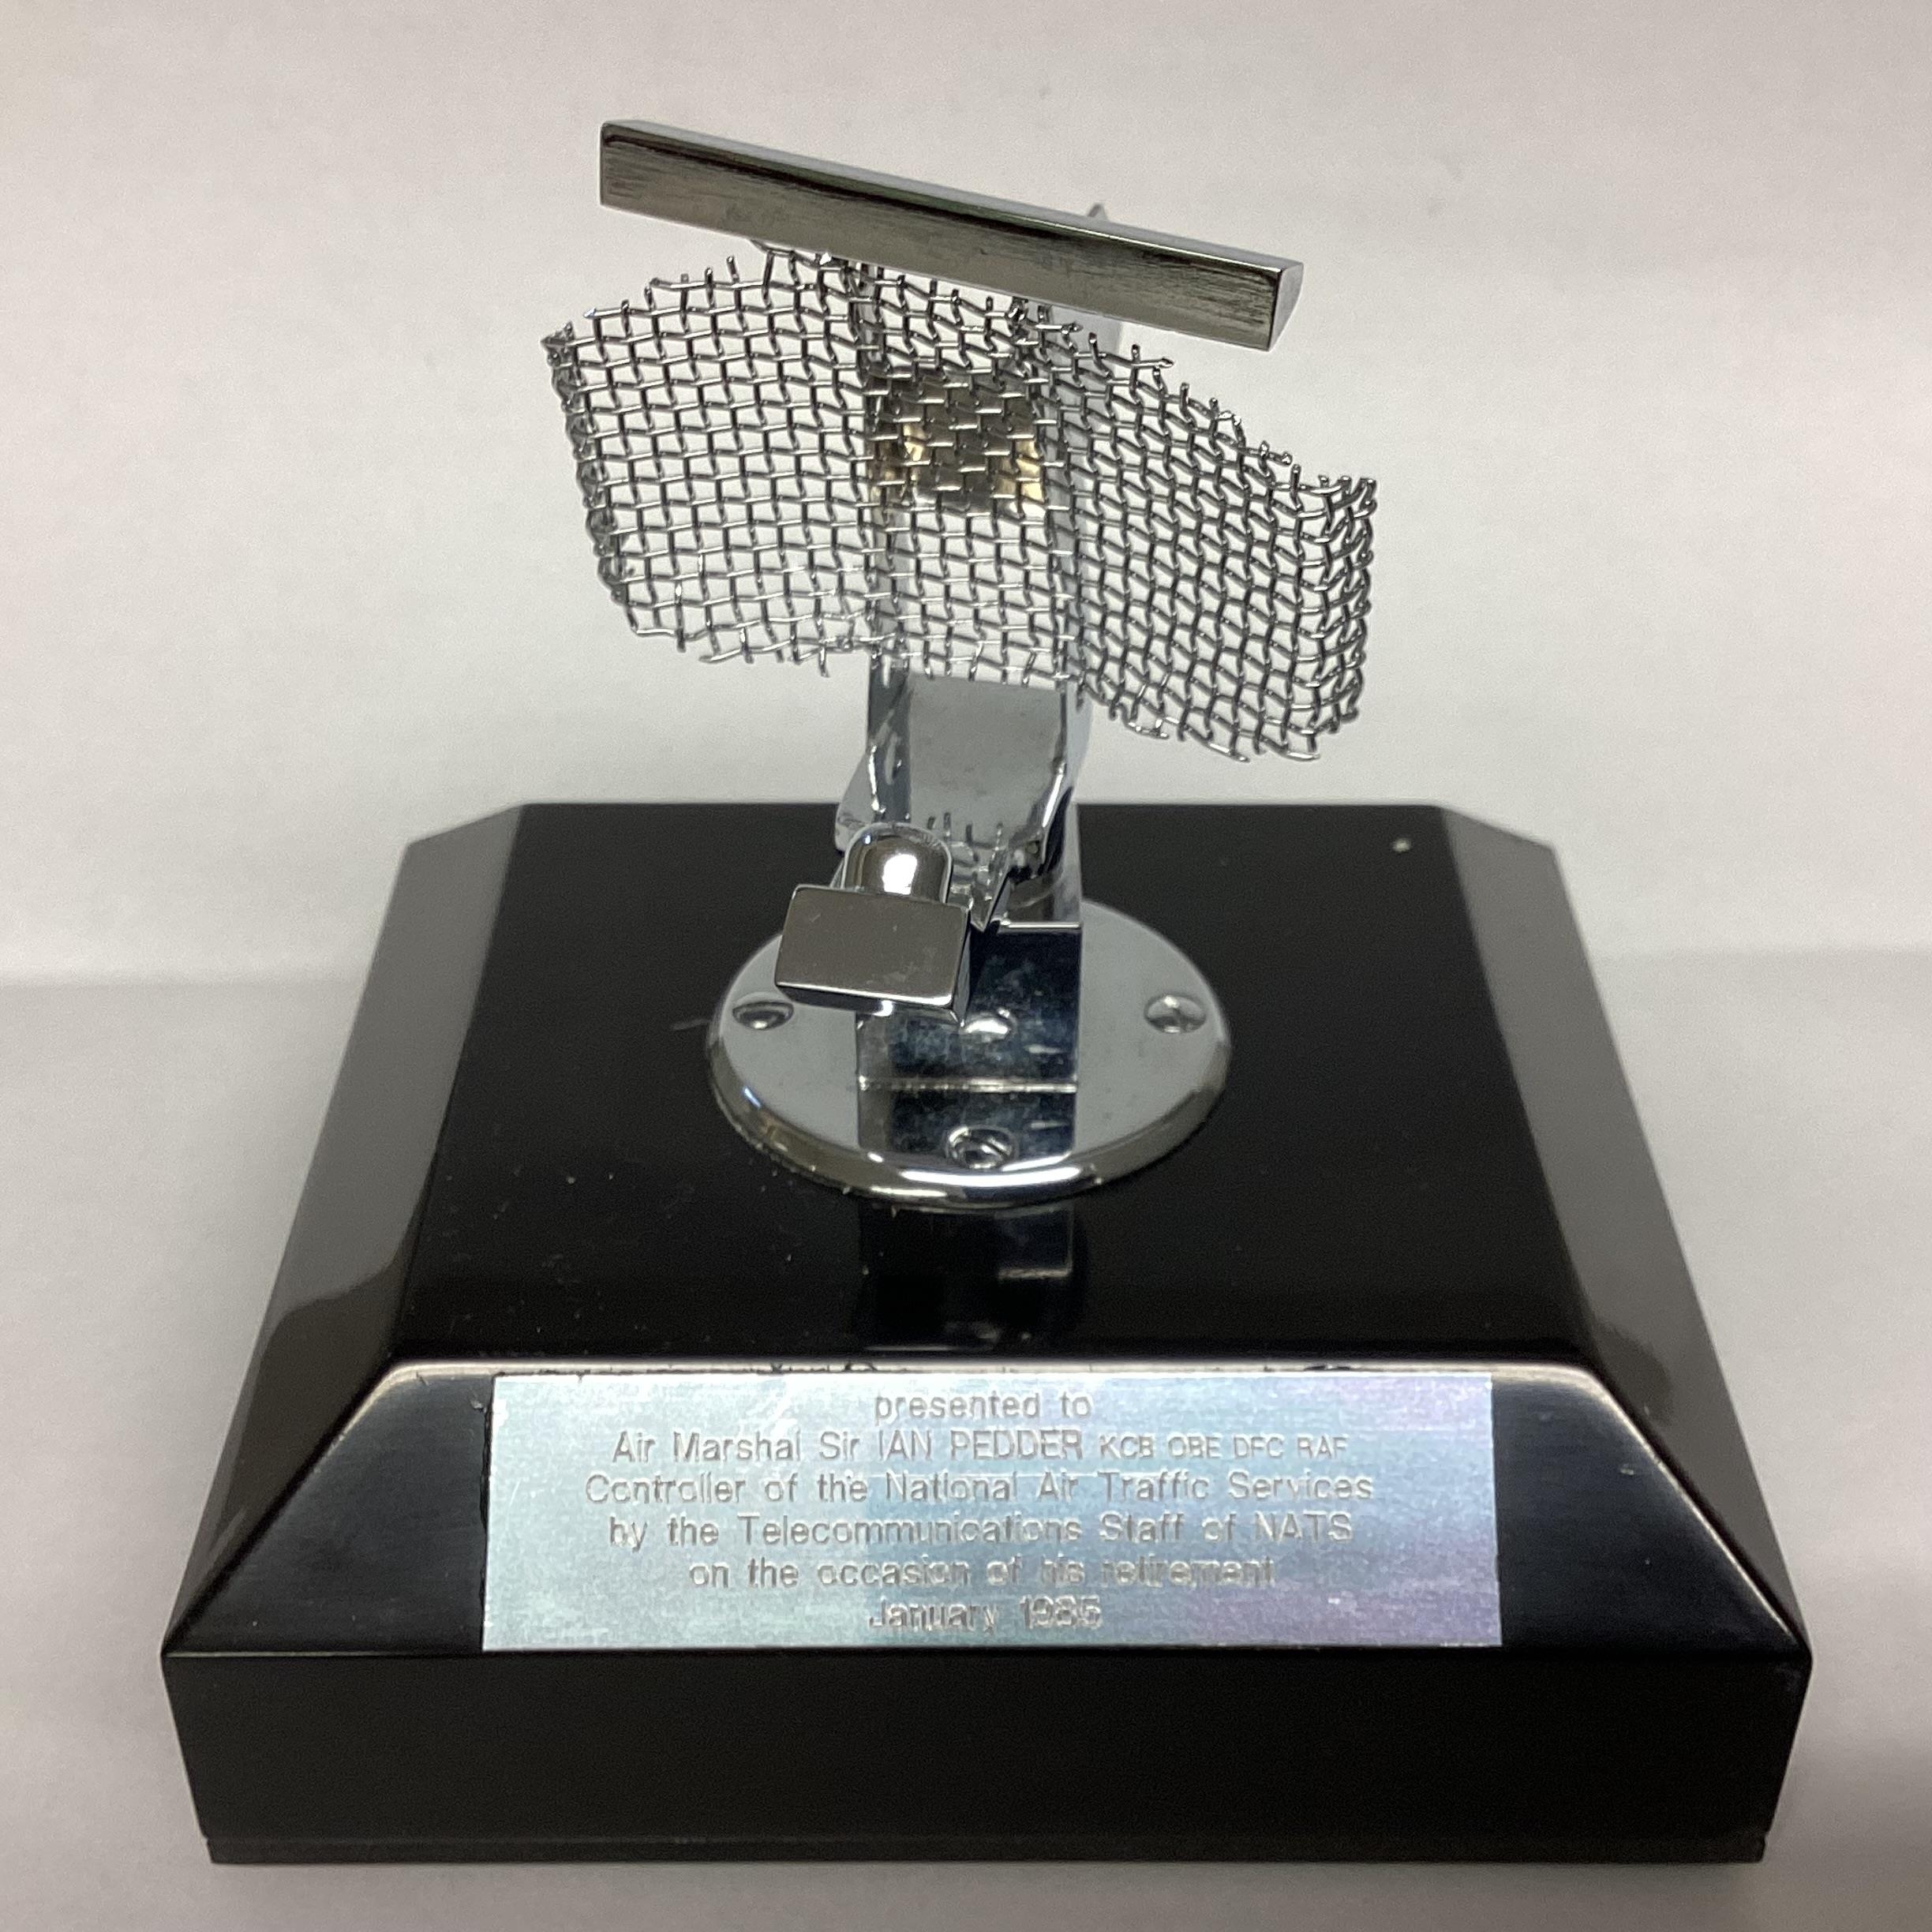 A presentation piece awarded to Air Chief Marshal, Ian Redder, modelled as a chrome radar on a - Image 2 of 4